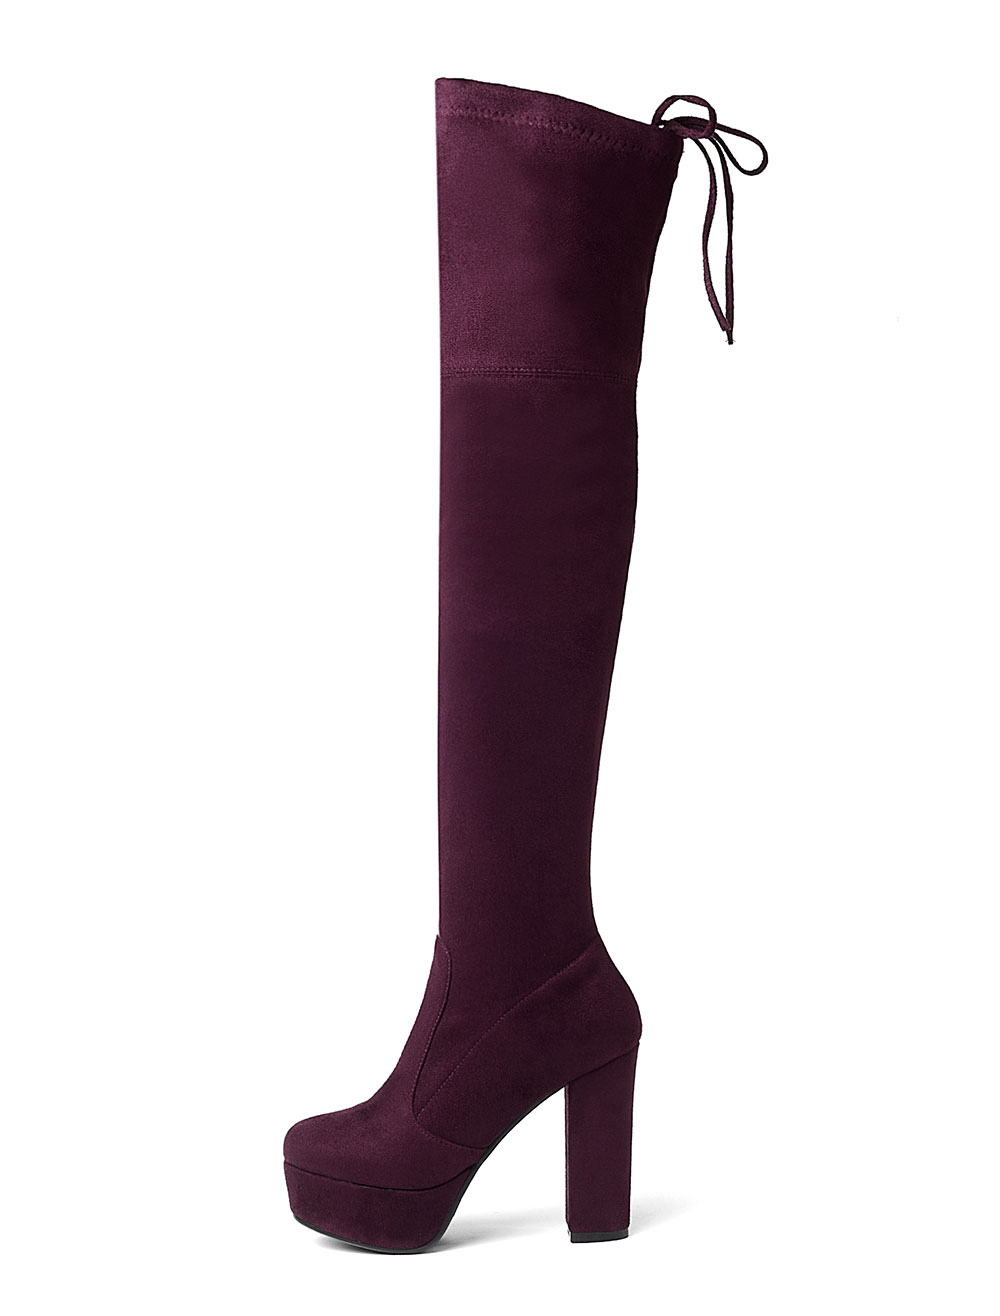 chunky heel lace up thigh high boots